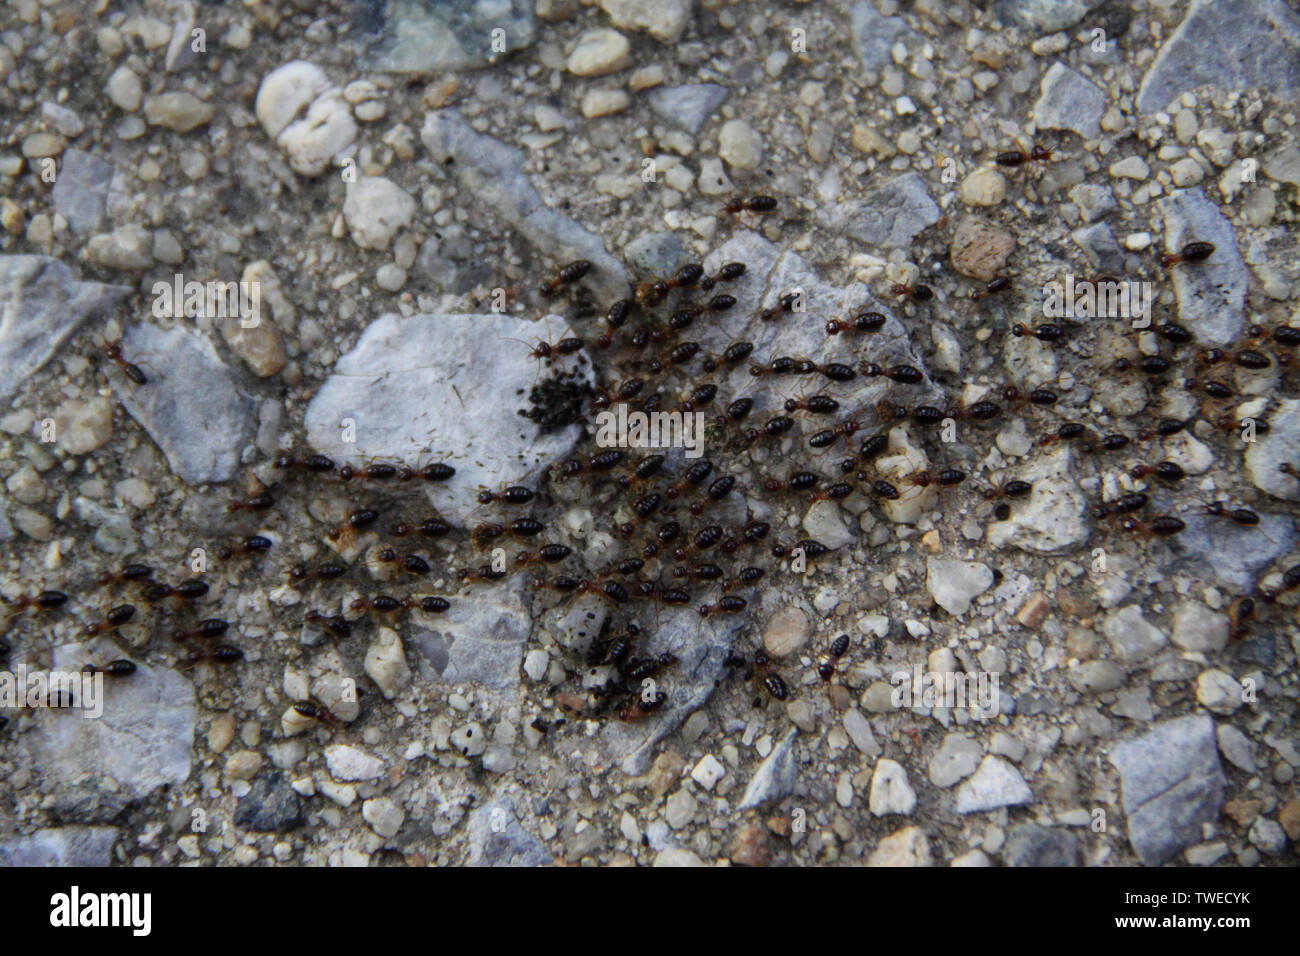 High angle view of colony of ants, Malaysia Stock Photo